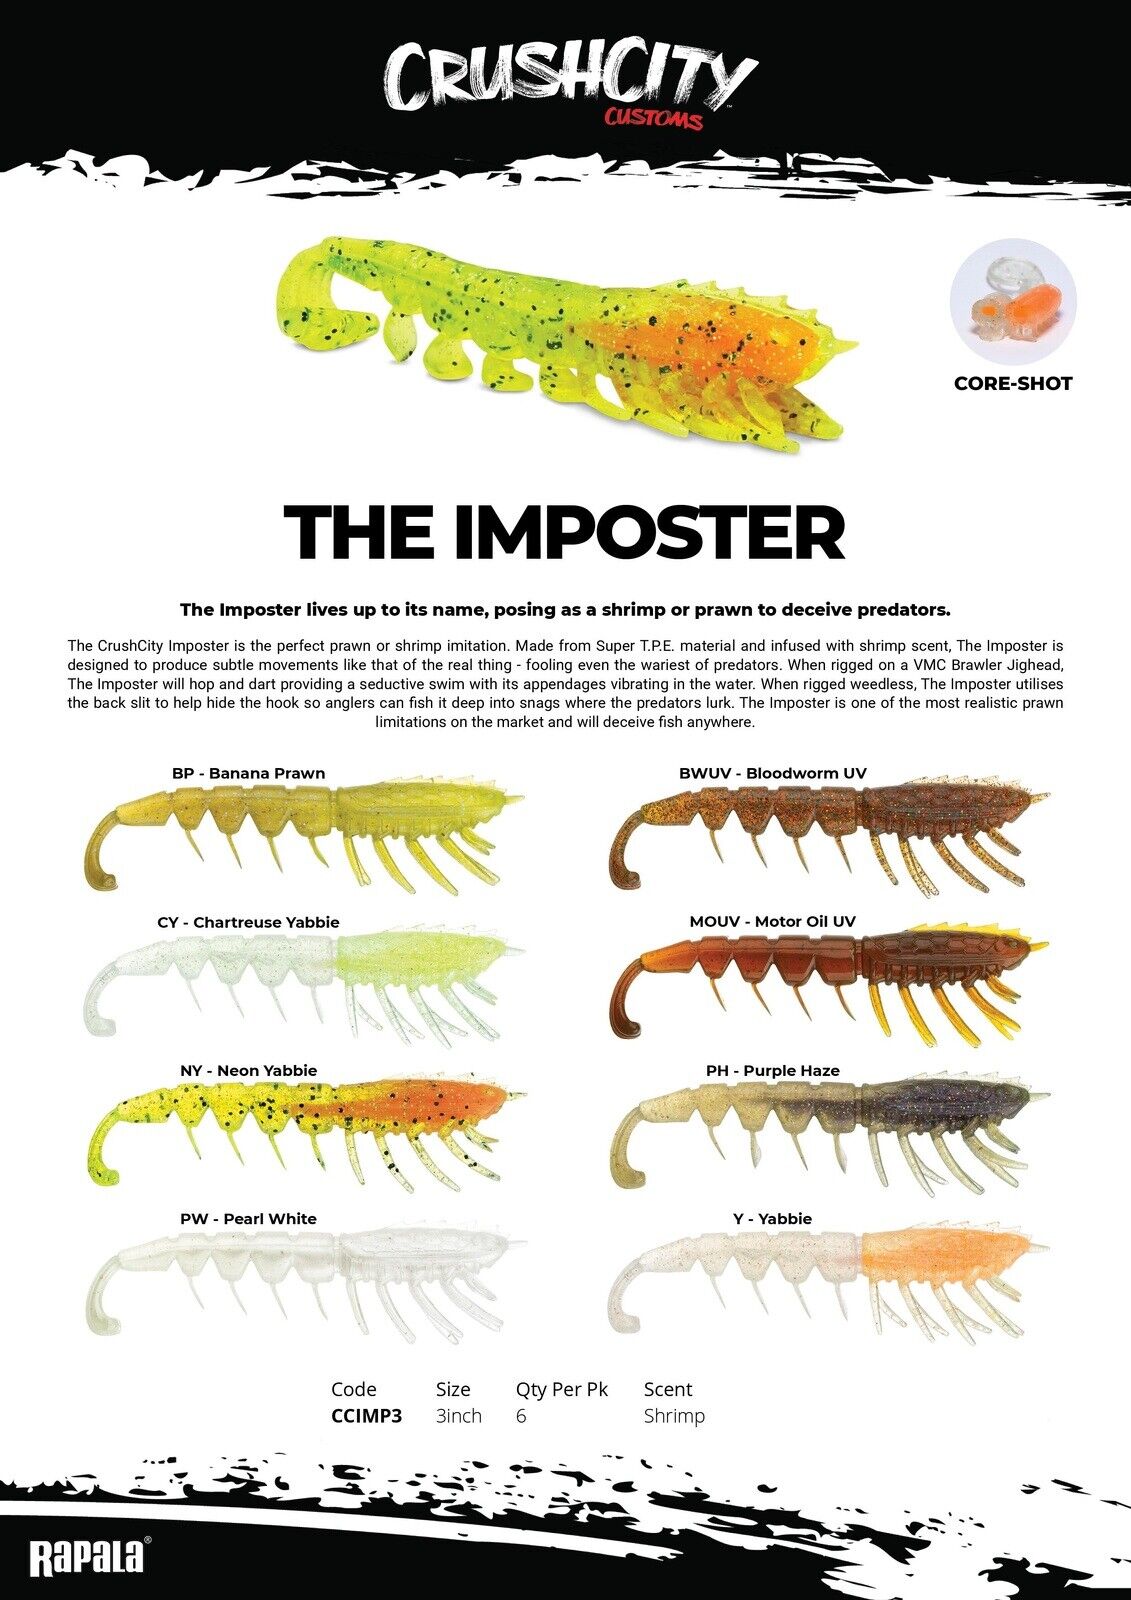 Rapala “CRUSH CITY” The Imposter Soft Plastic Fishing Lures (6